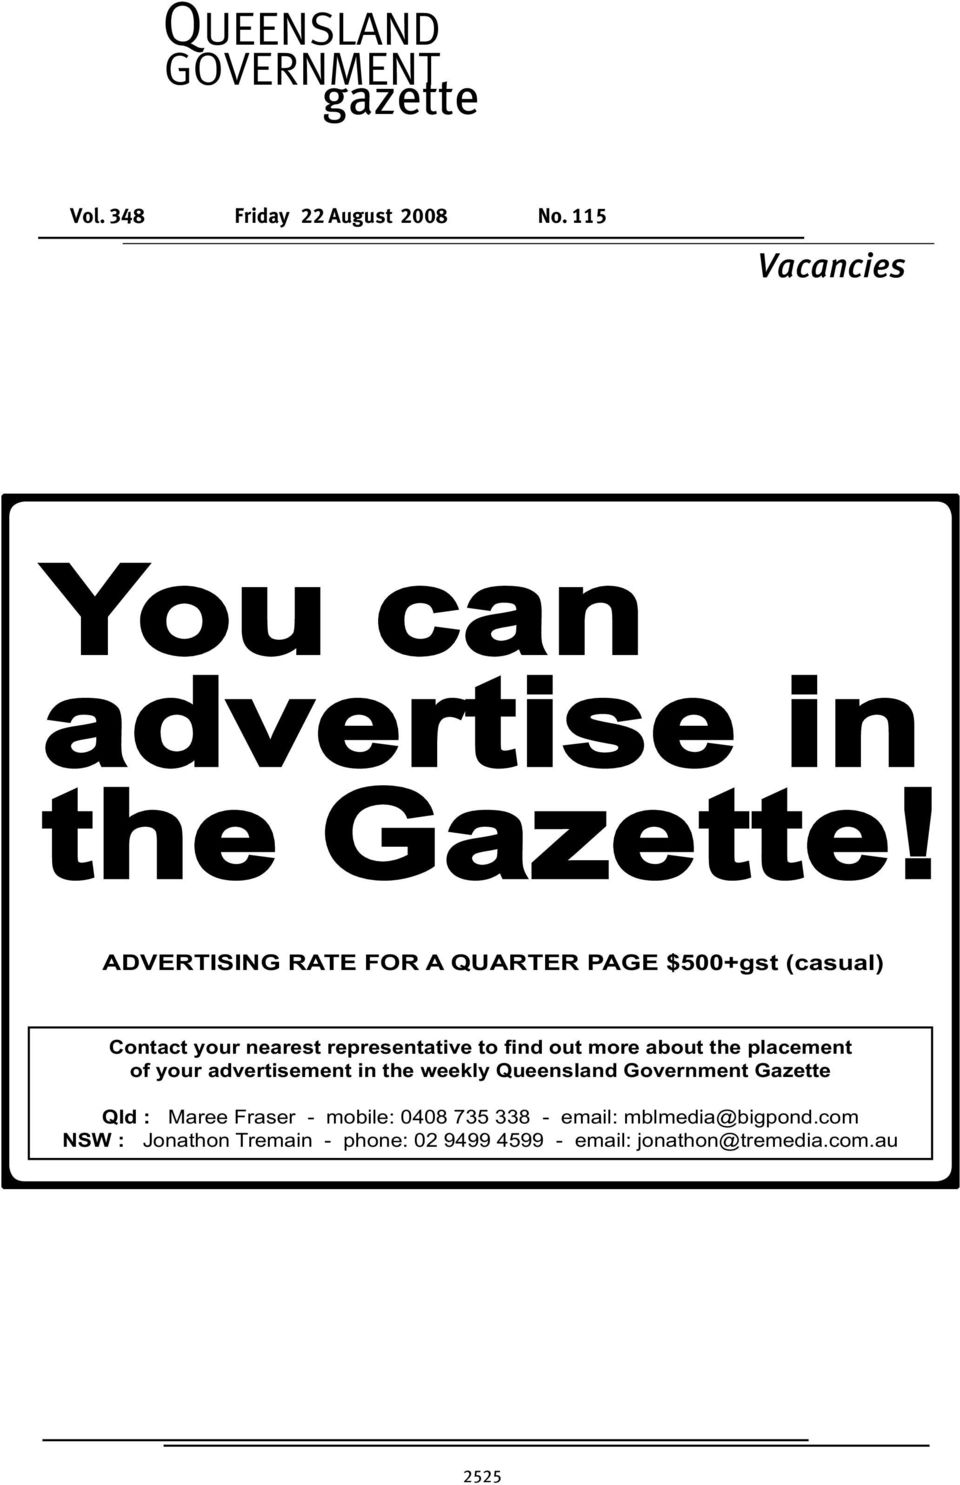 the placement of your advertisement in the weekly Queensland Government Gazette Qld : Maree Fraser - mobile: 0408